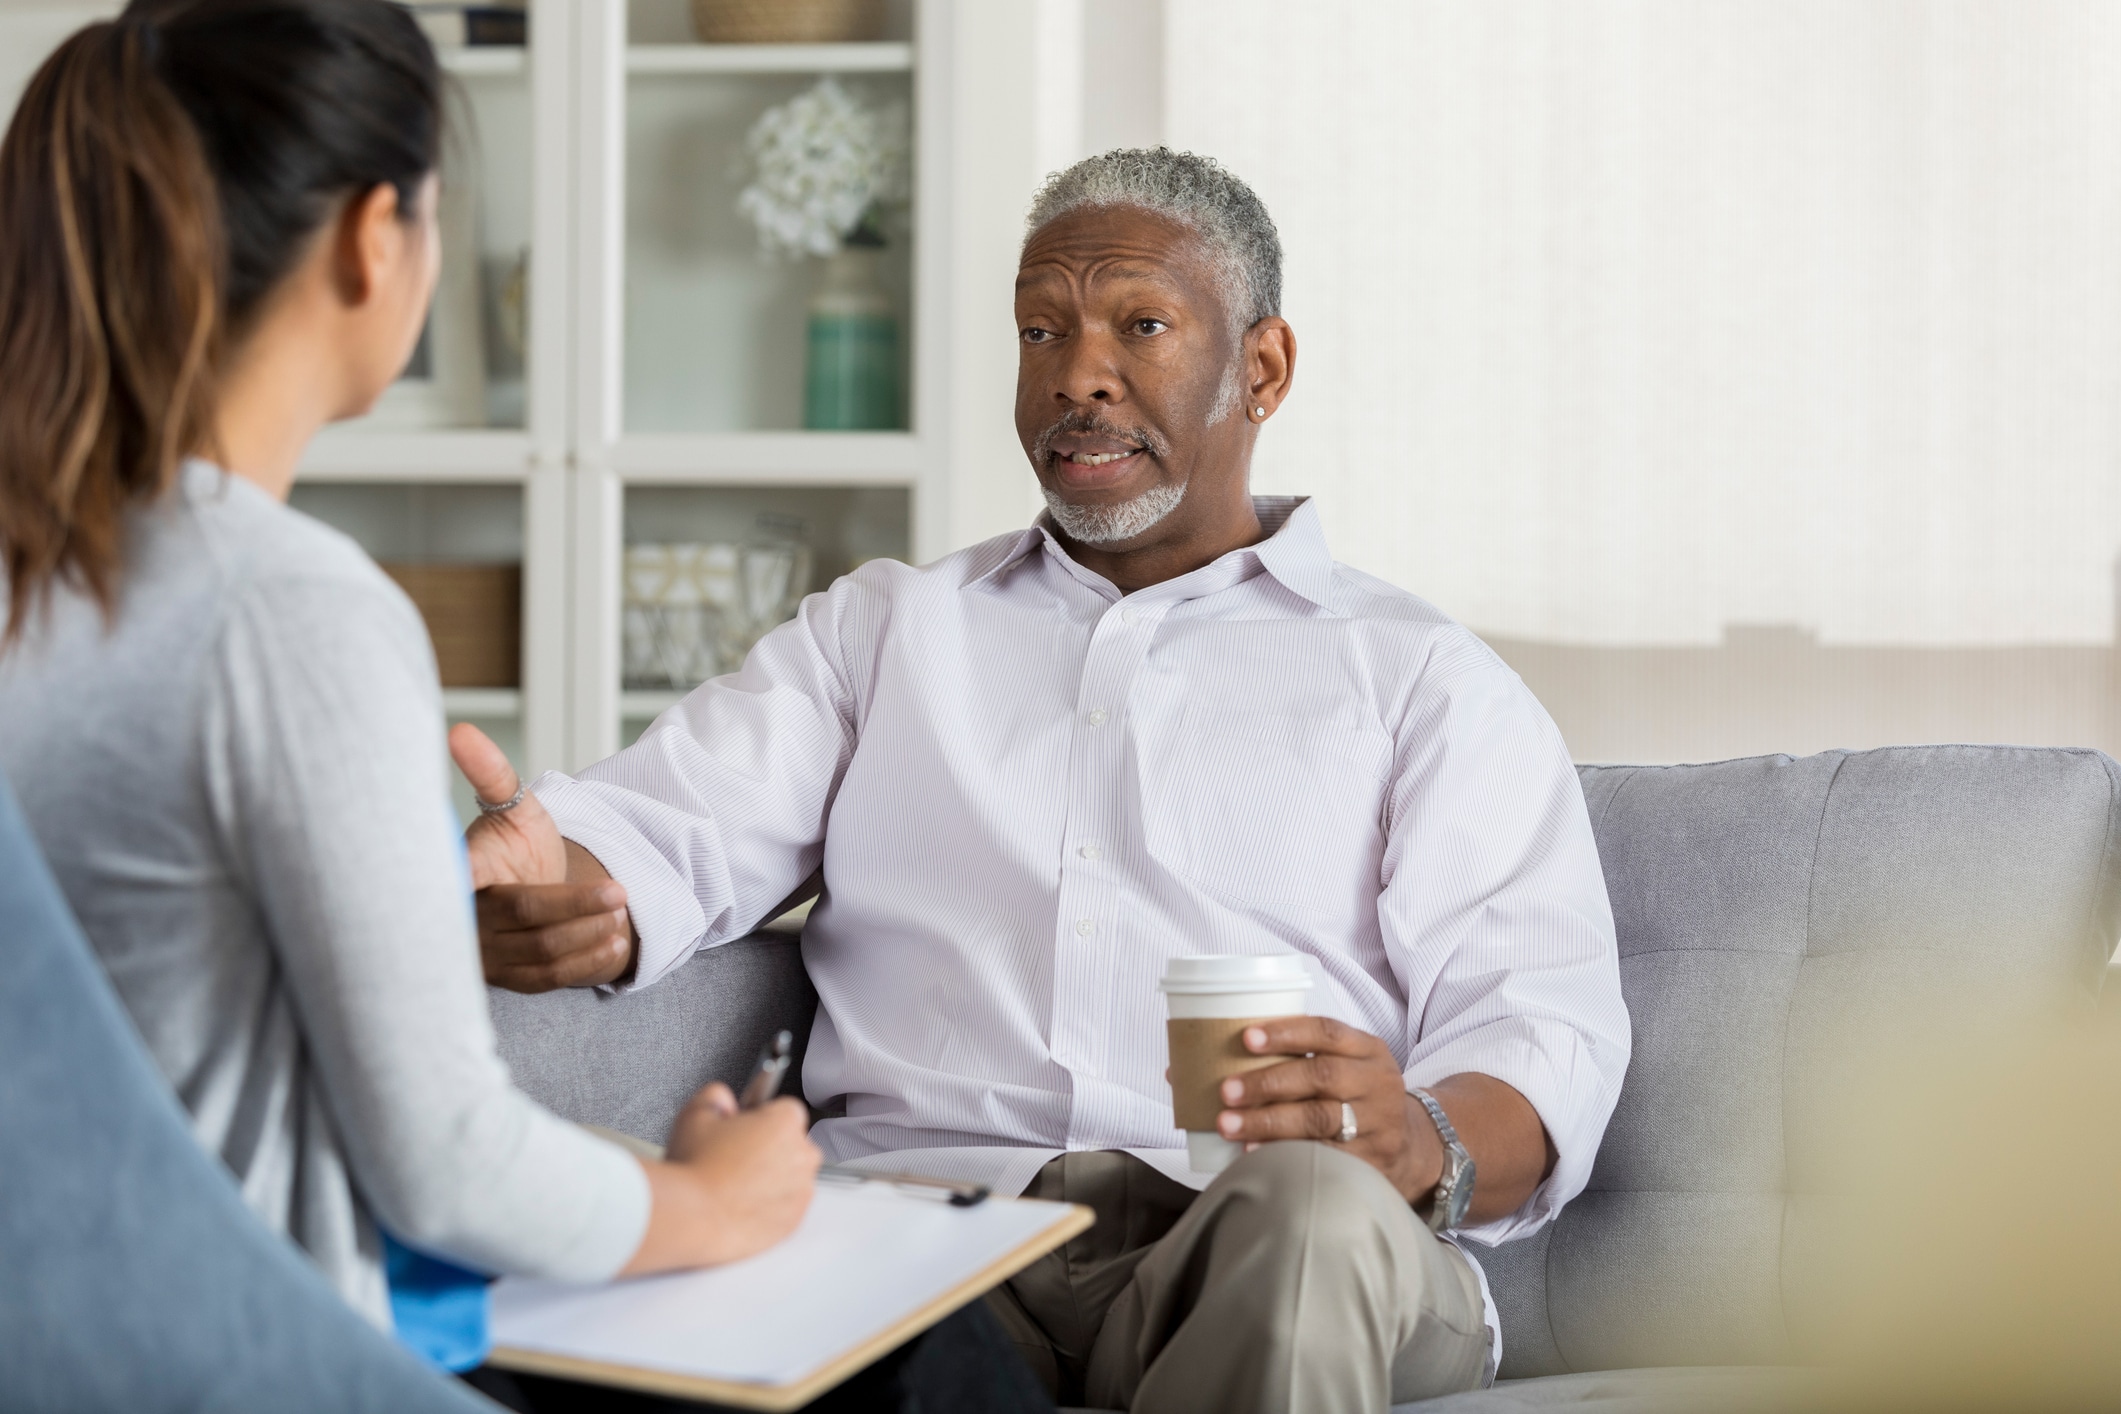 How to encourage talk therapy for seniors who are skeptical